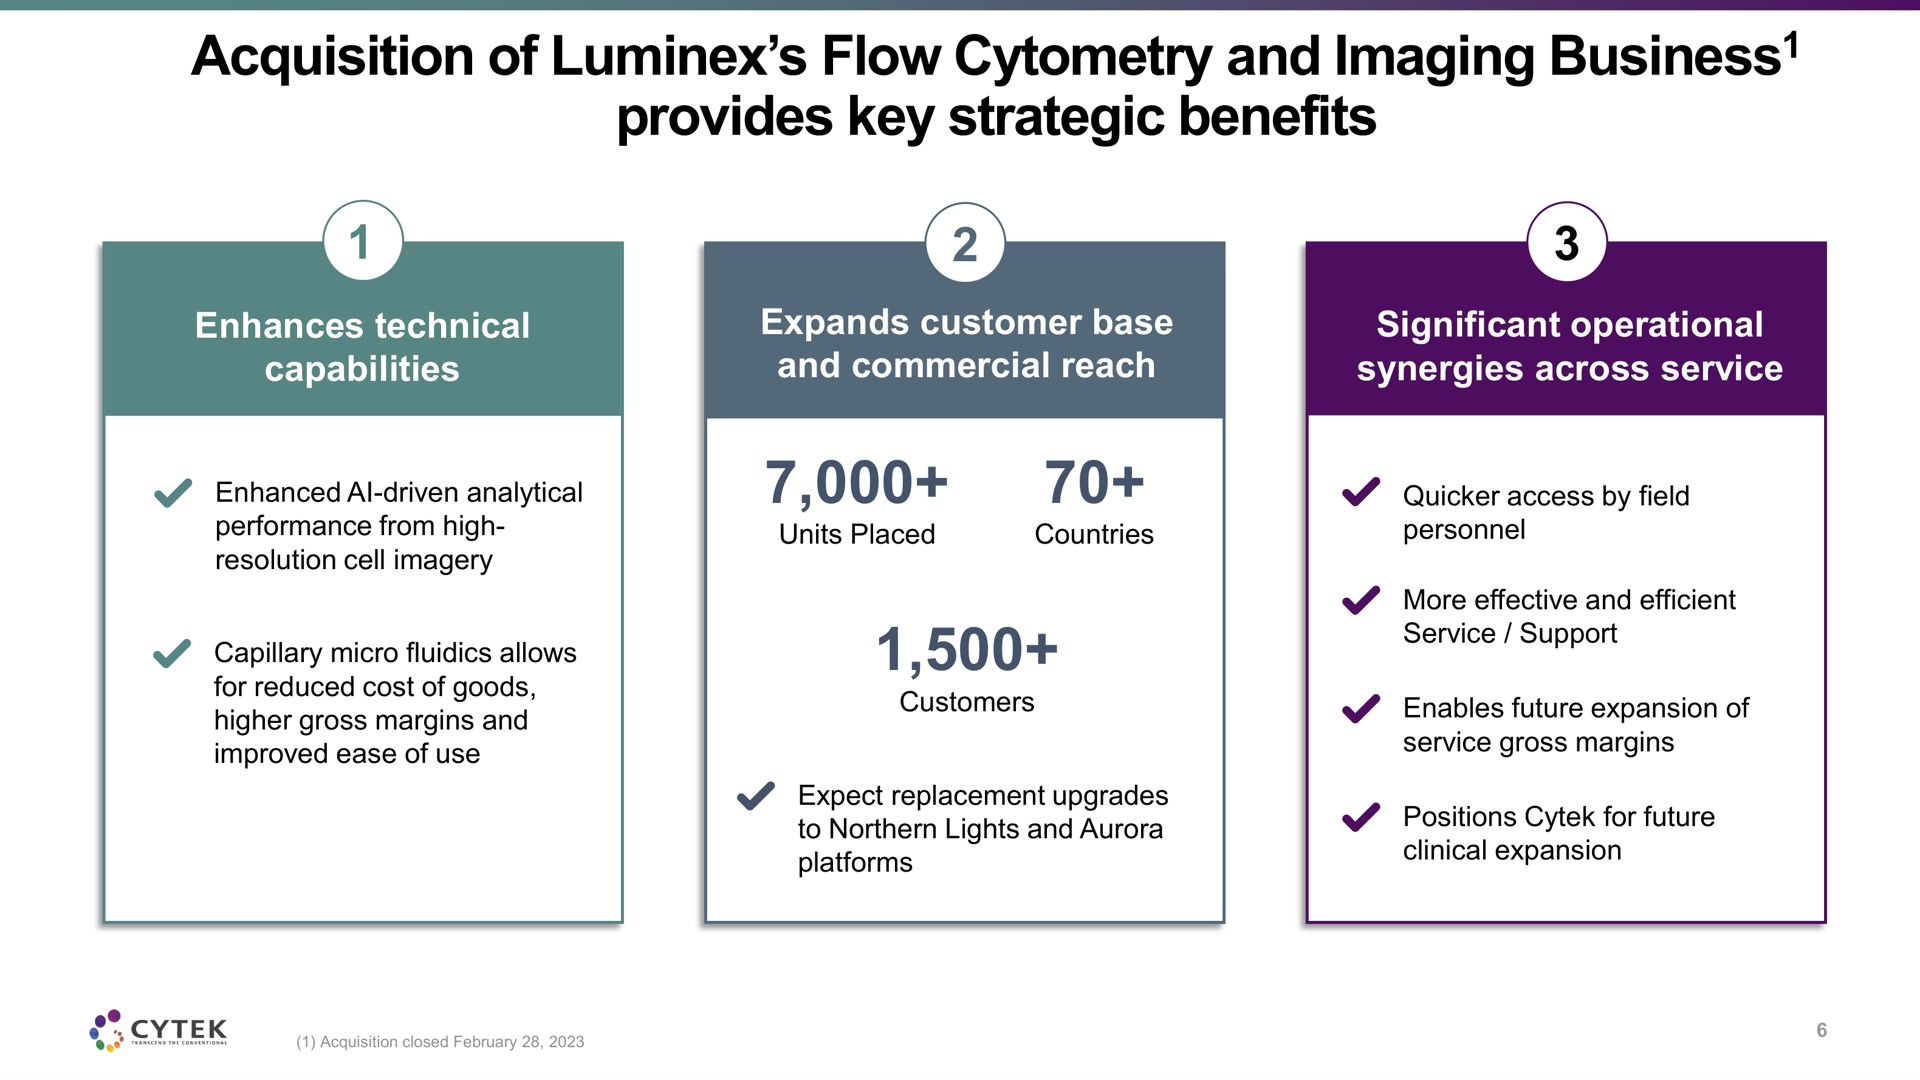 acquisition of flow and imaging business provides key strategic benefits business | Cytek